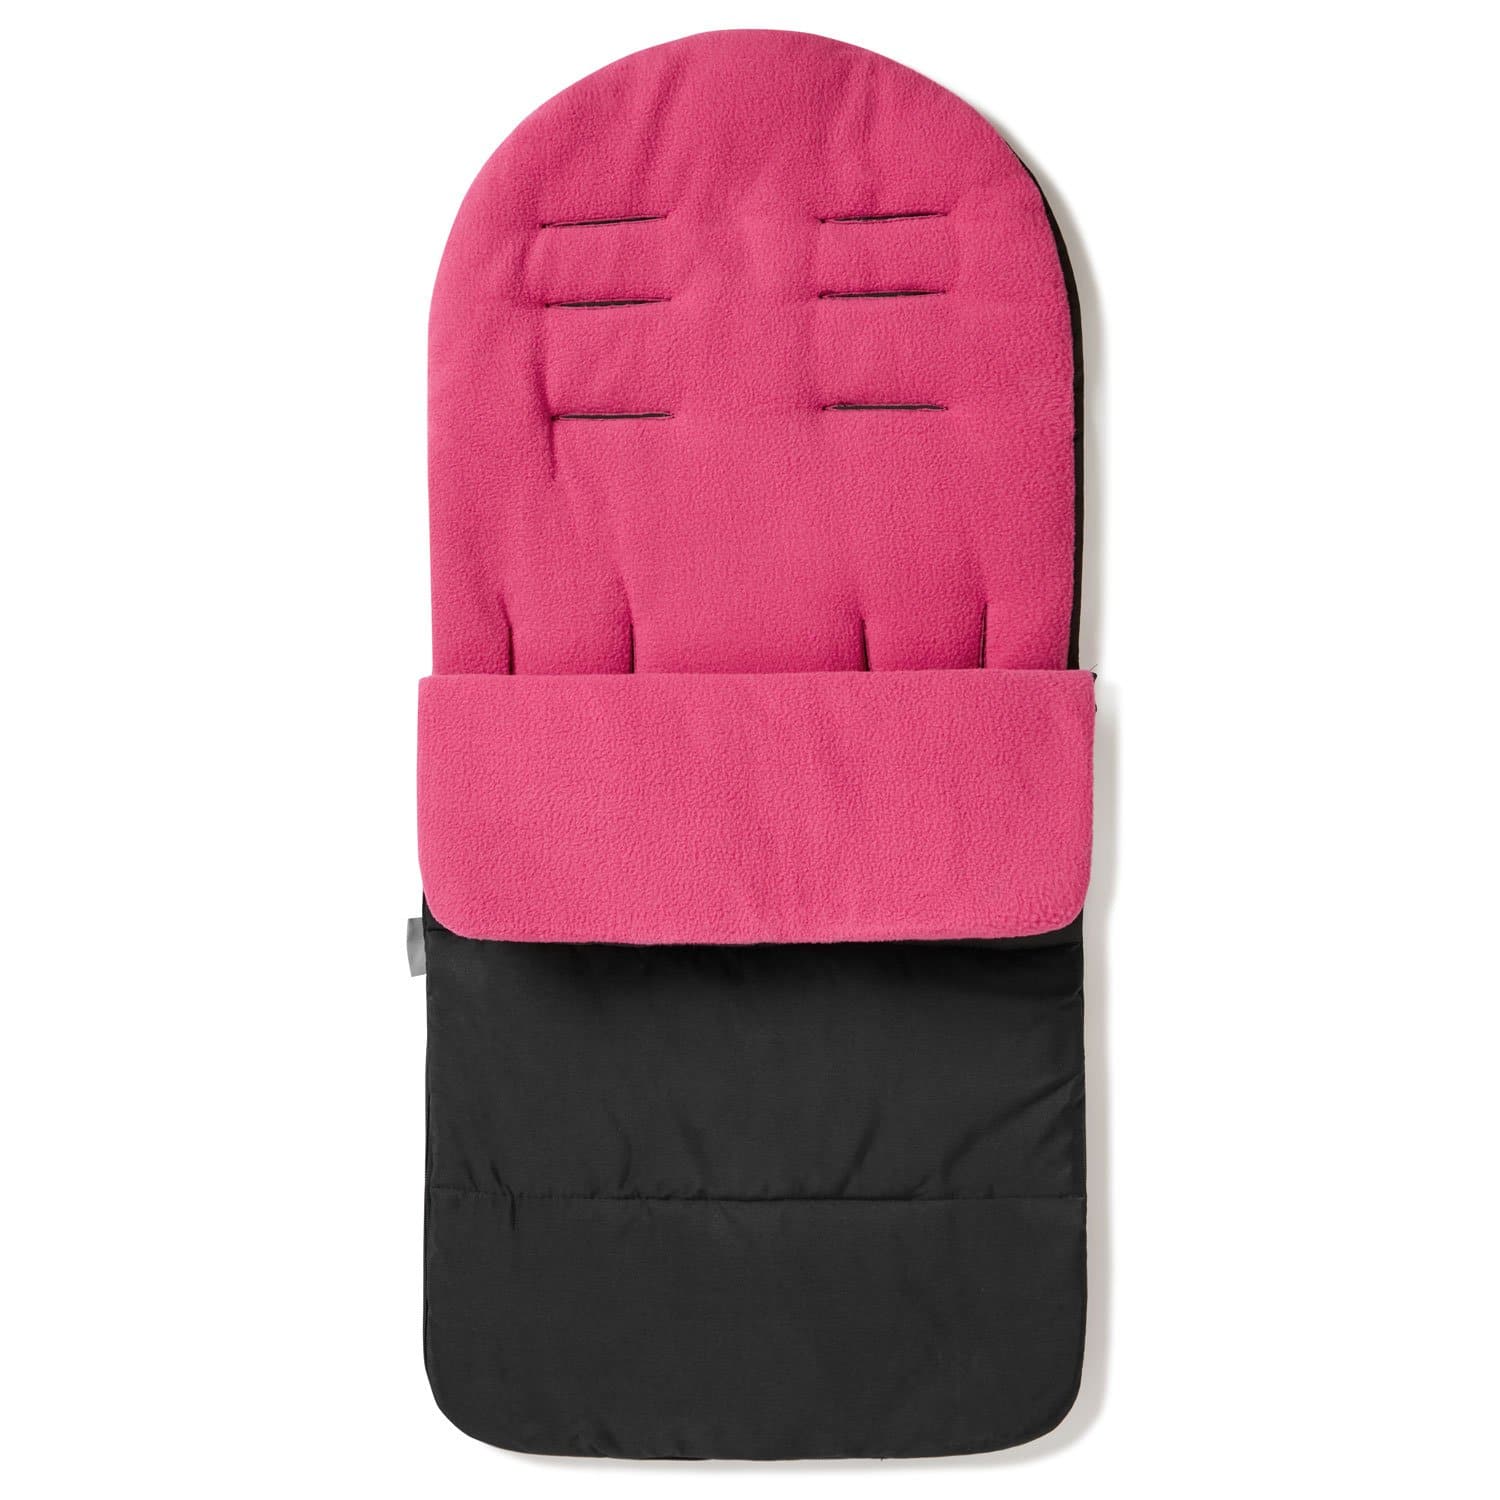 Premium Footmuff / Cosy Toes Compatible with Mamas & Papas - Pink Rose / Fits All Models | For Your Little One